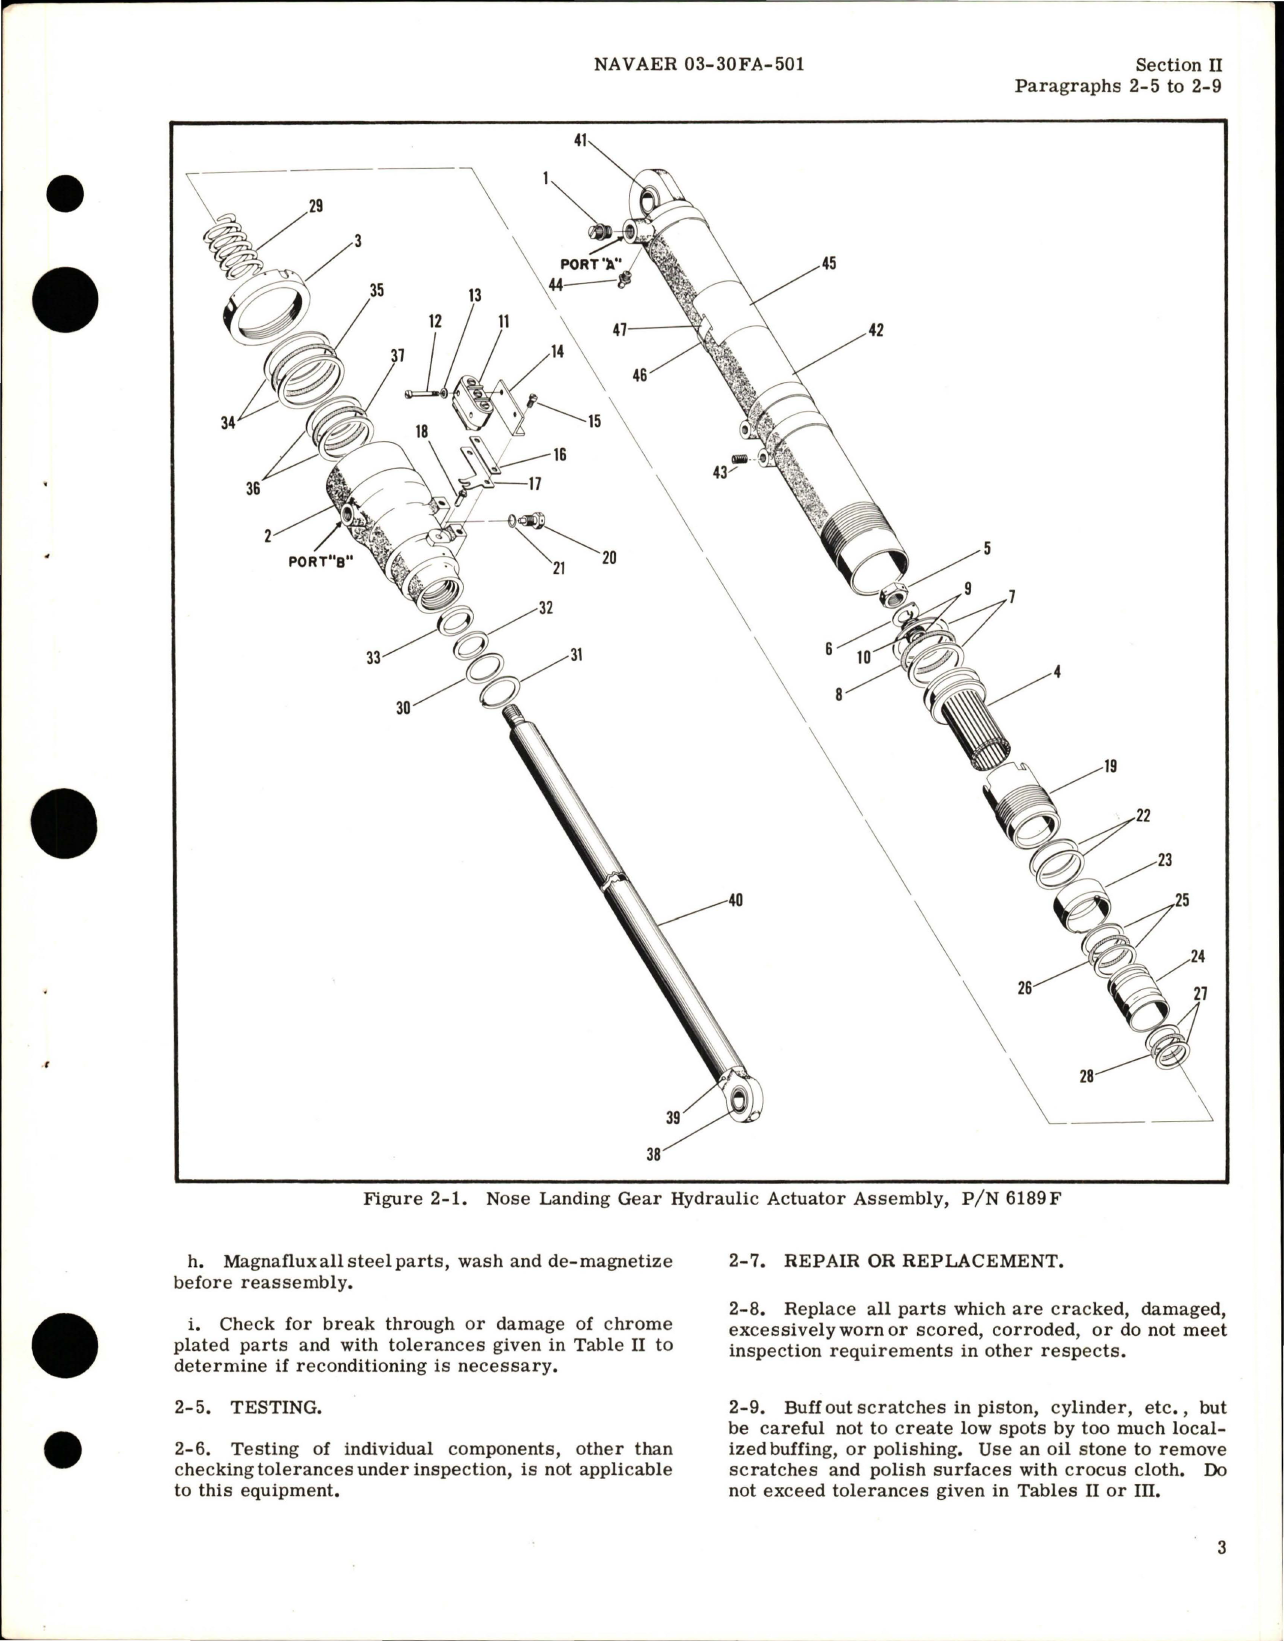 Sample page 5 from AirCorps Library document: Overhaul Instructions for Nose Landing Gear Hydraulic Actuator Assembly - Part 6189F 